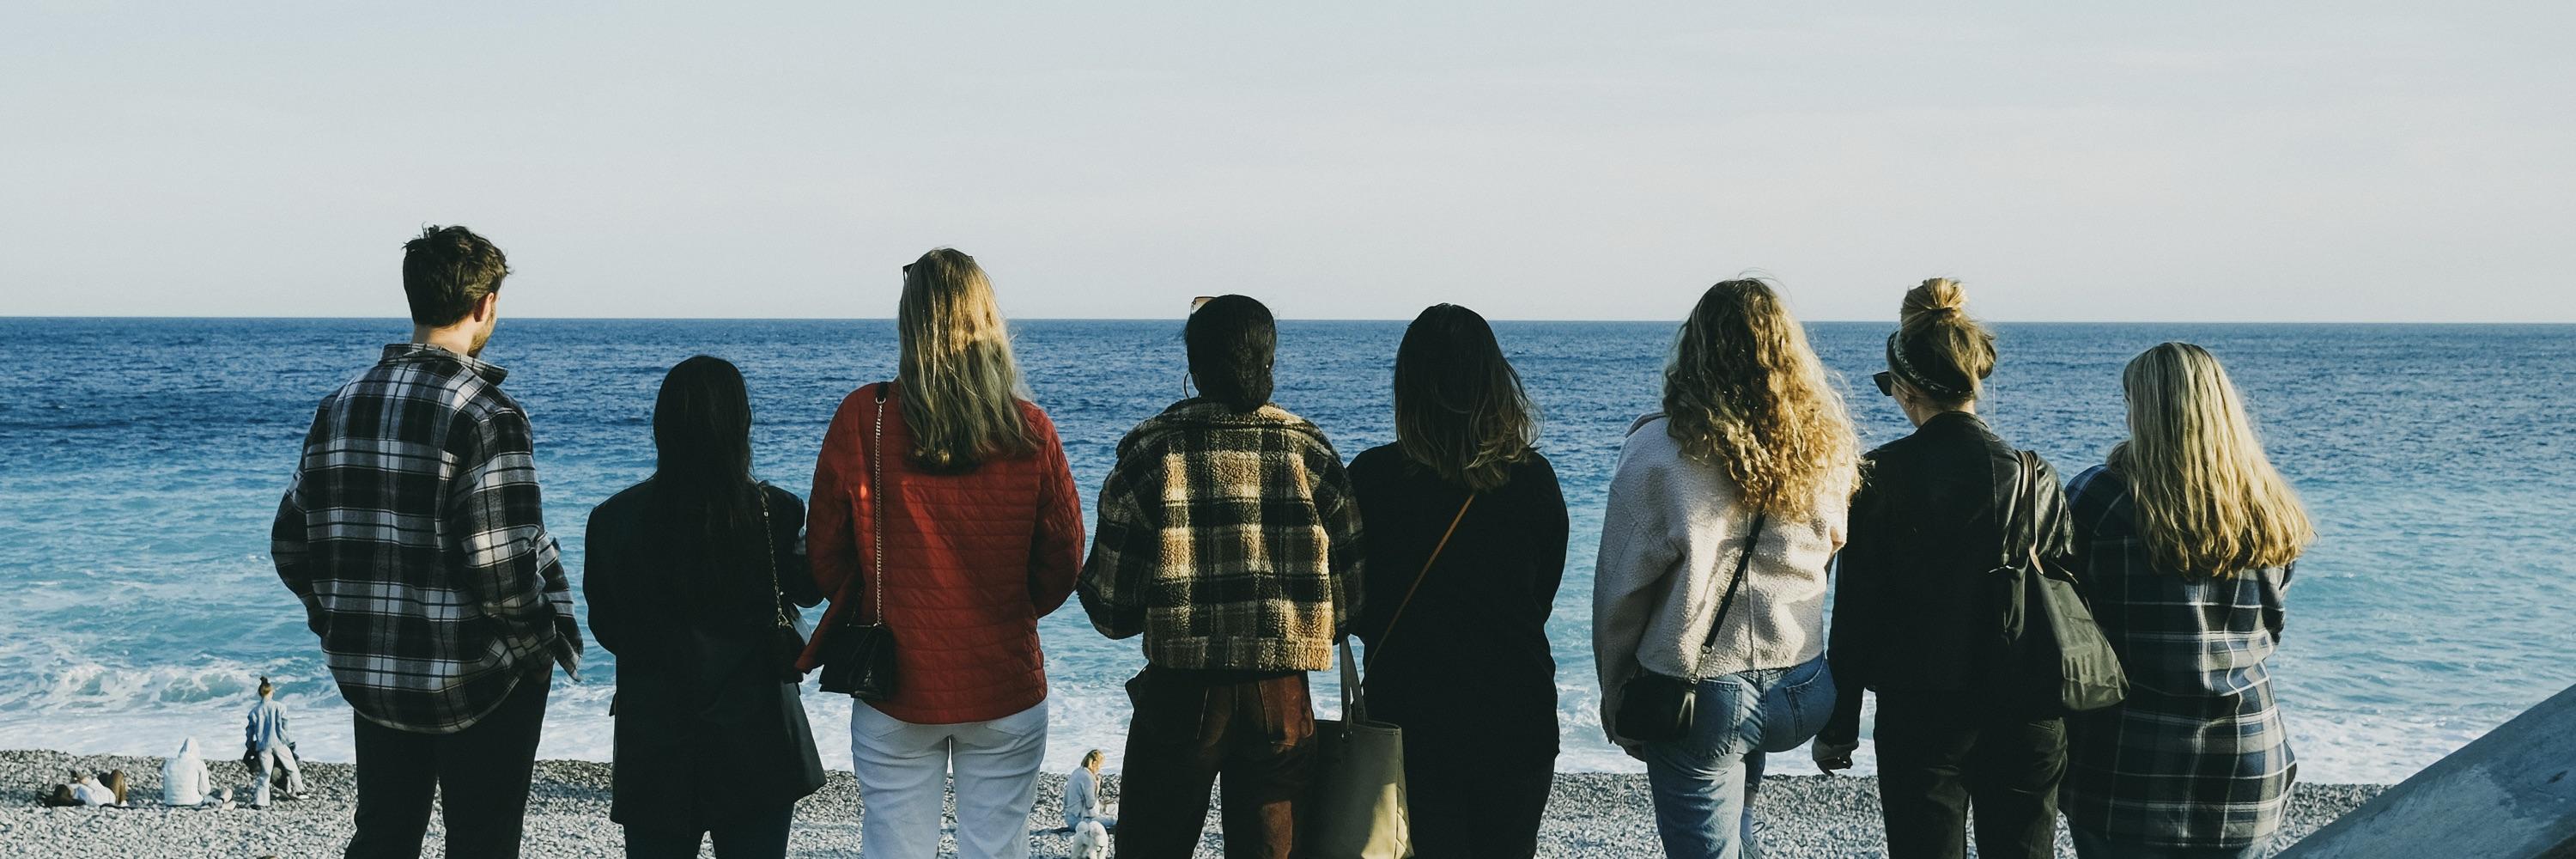 Eight students look out into the Mediterranean Sea from the shore in Nice, France.